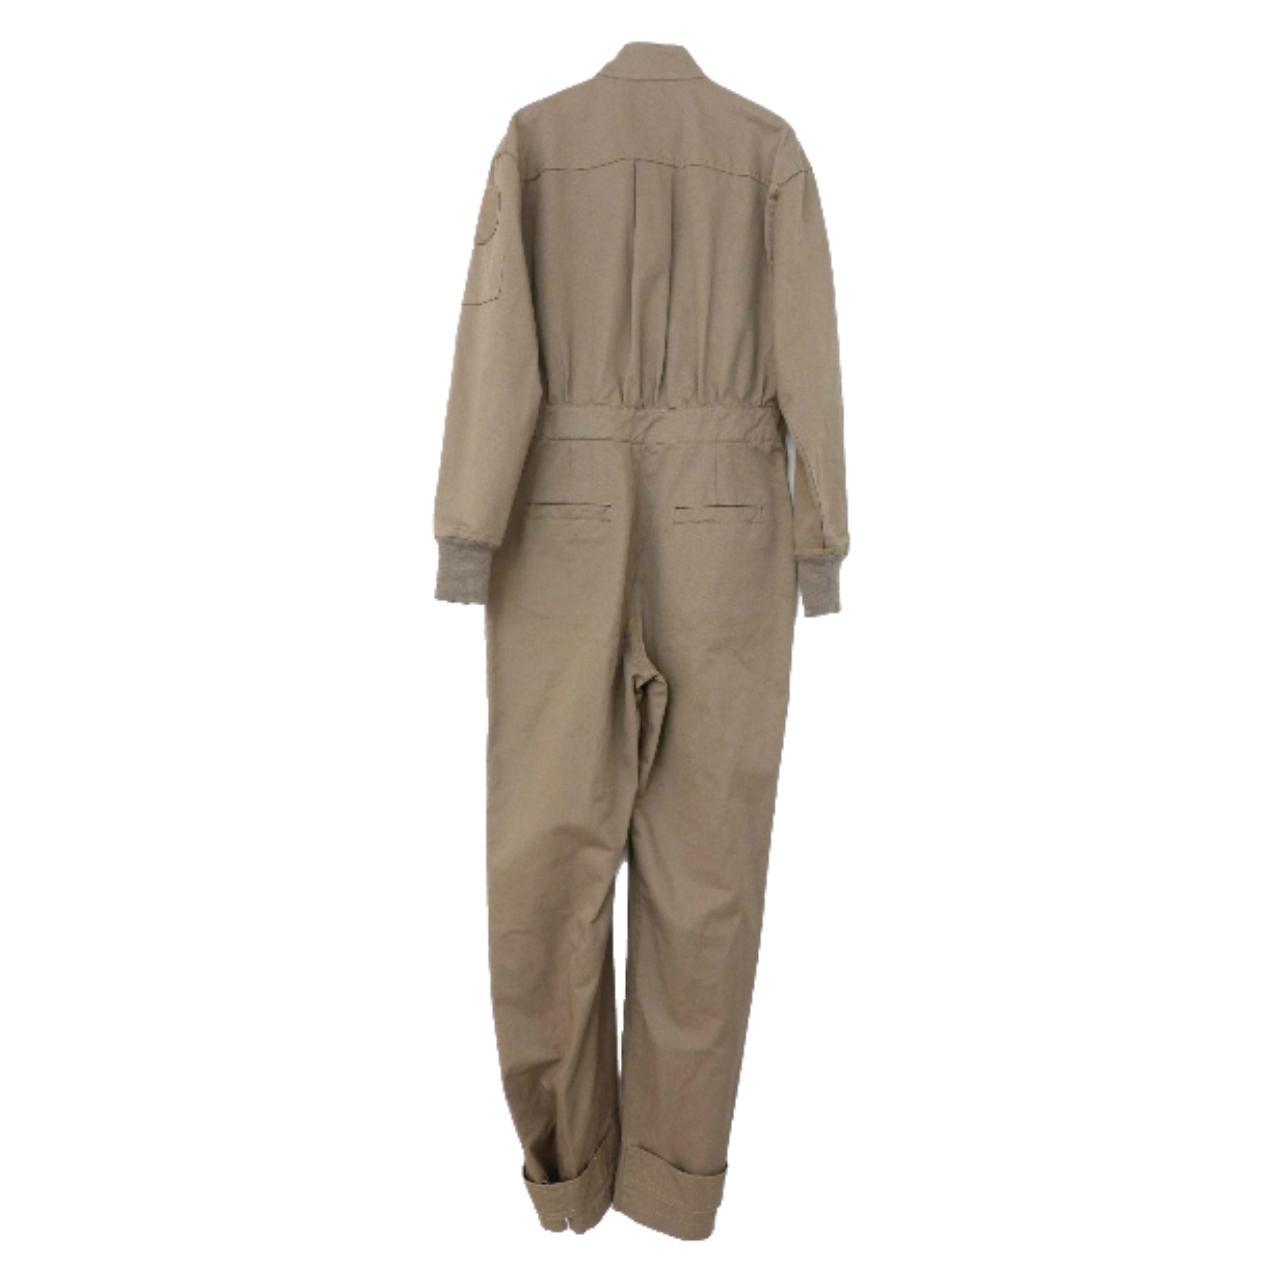 Cool and comfy boiler-suit style jumpsuit from... - Depop